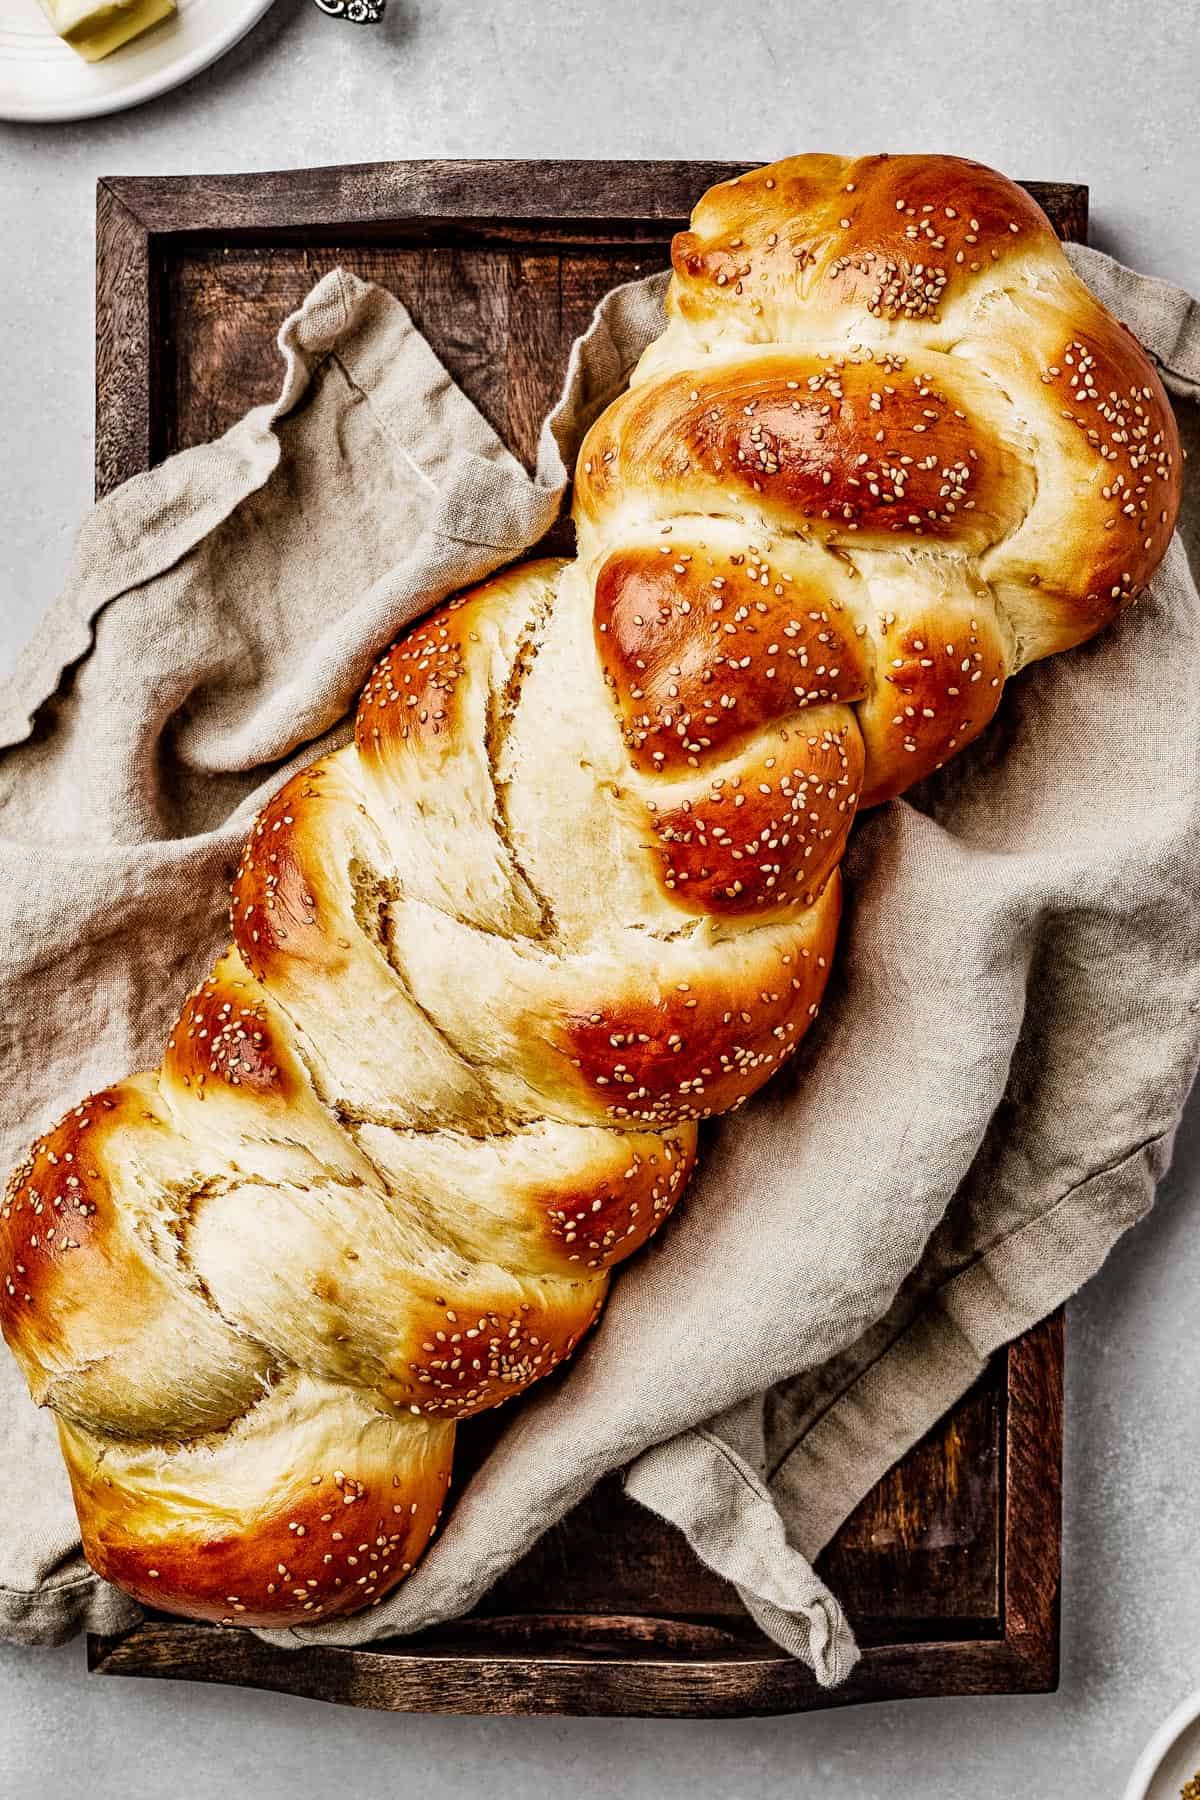 Baked challah with sesame seeds, on a sheet pan with a tea towel.